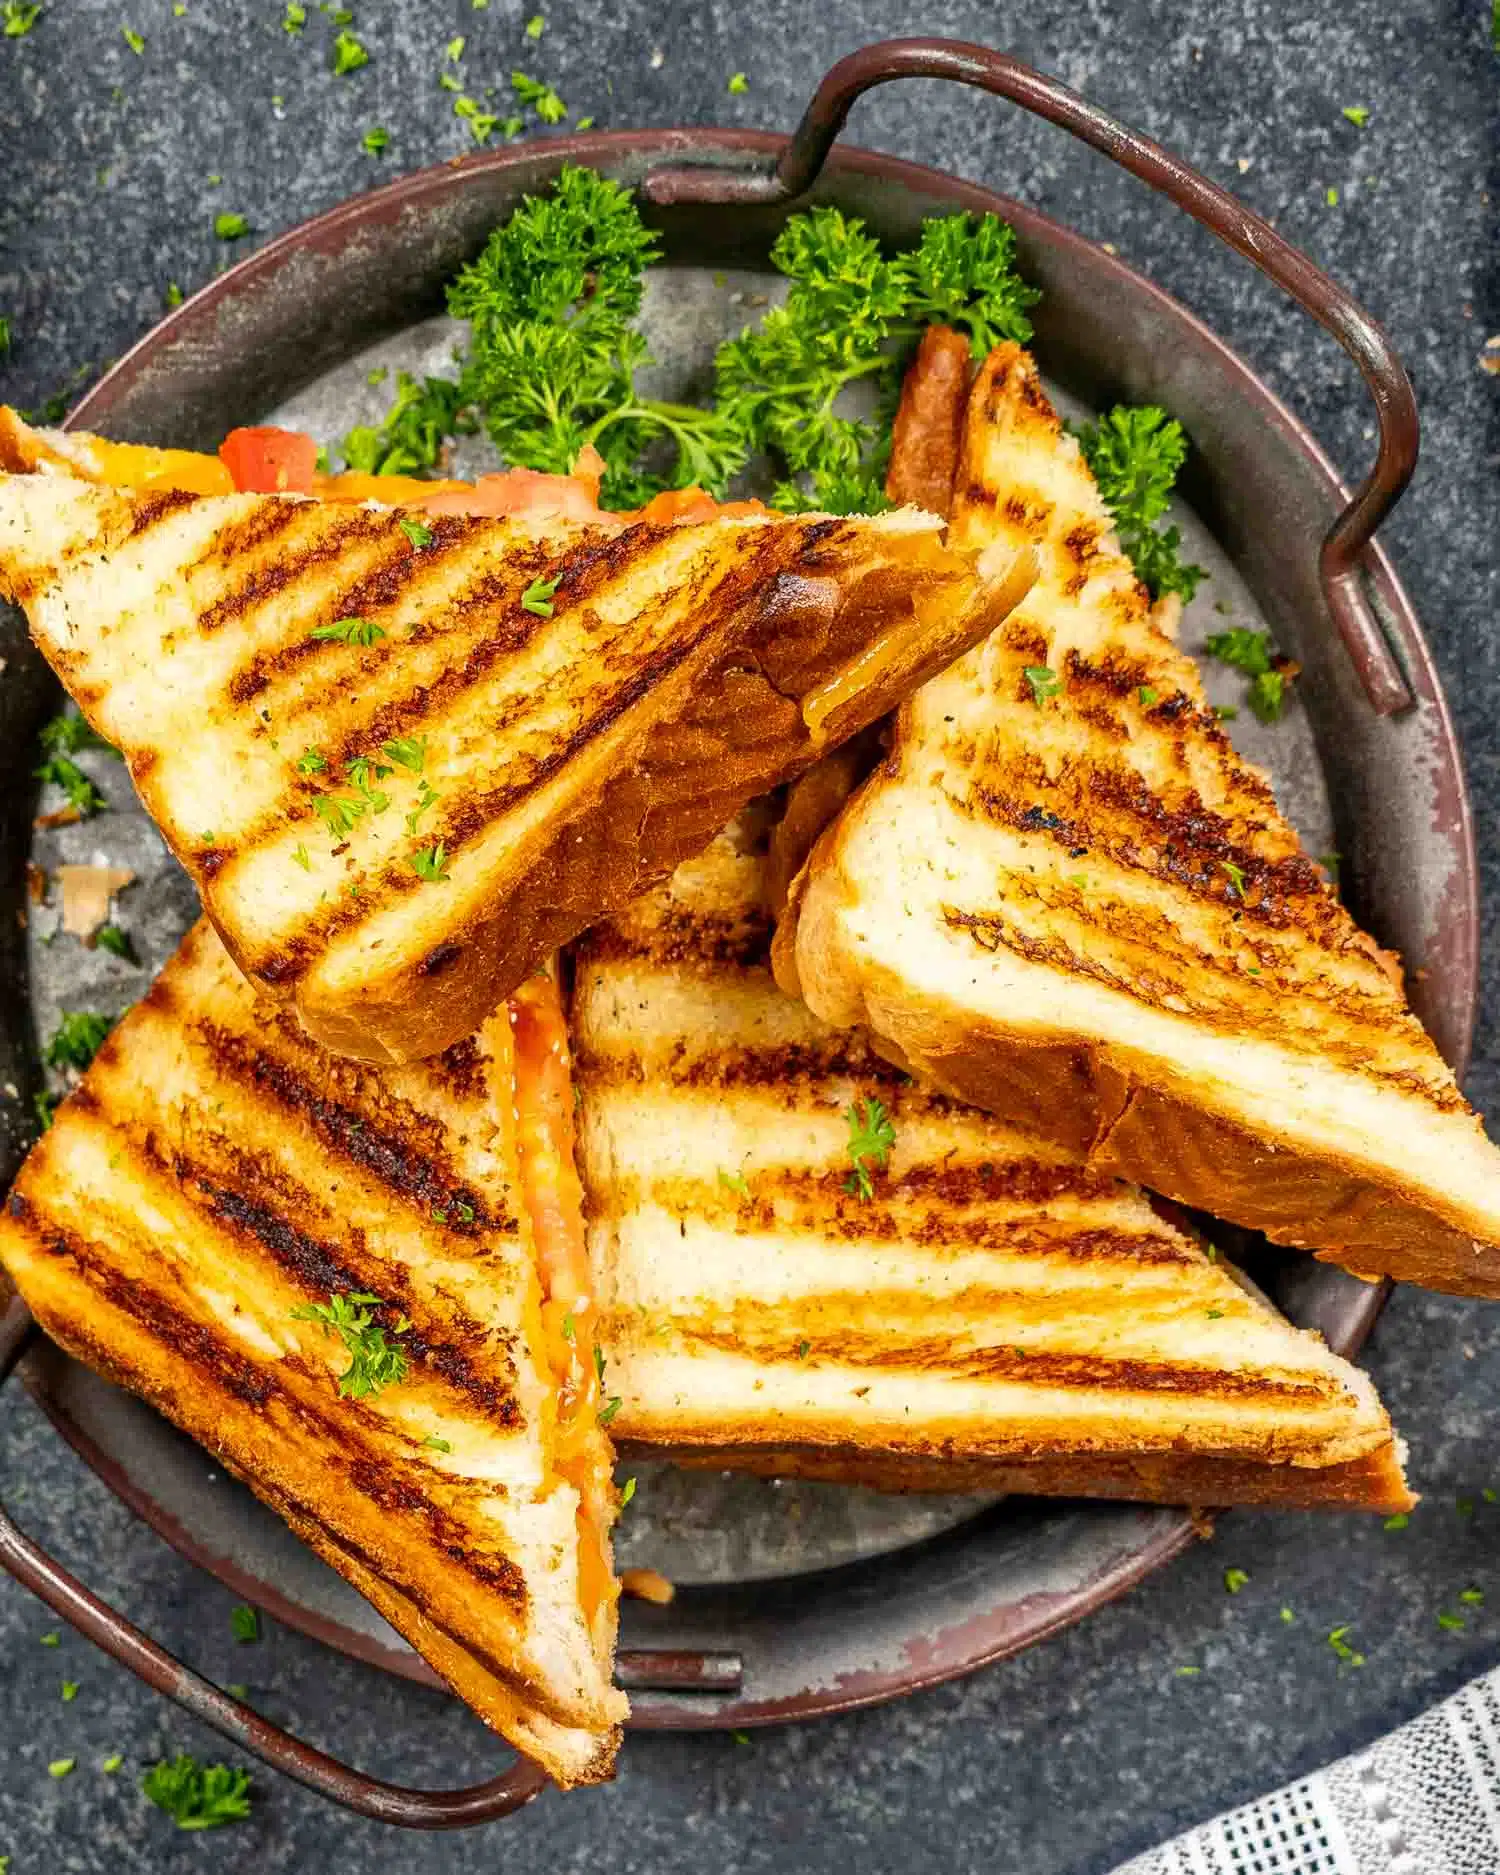 grilled cheese sandwich cut in half on a plate.